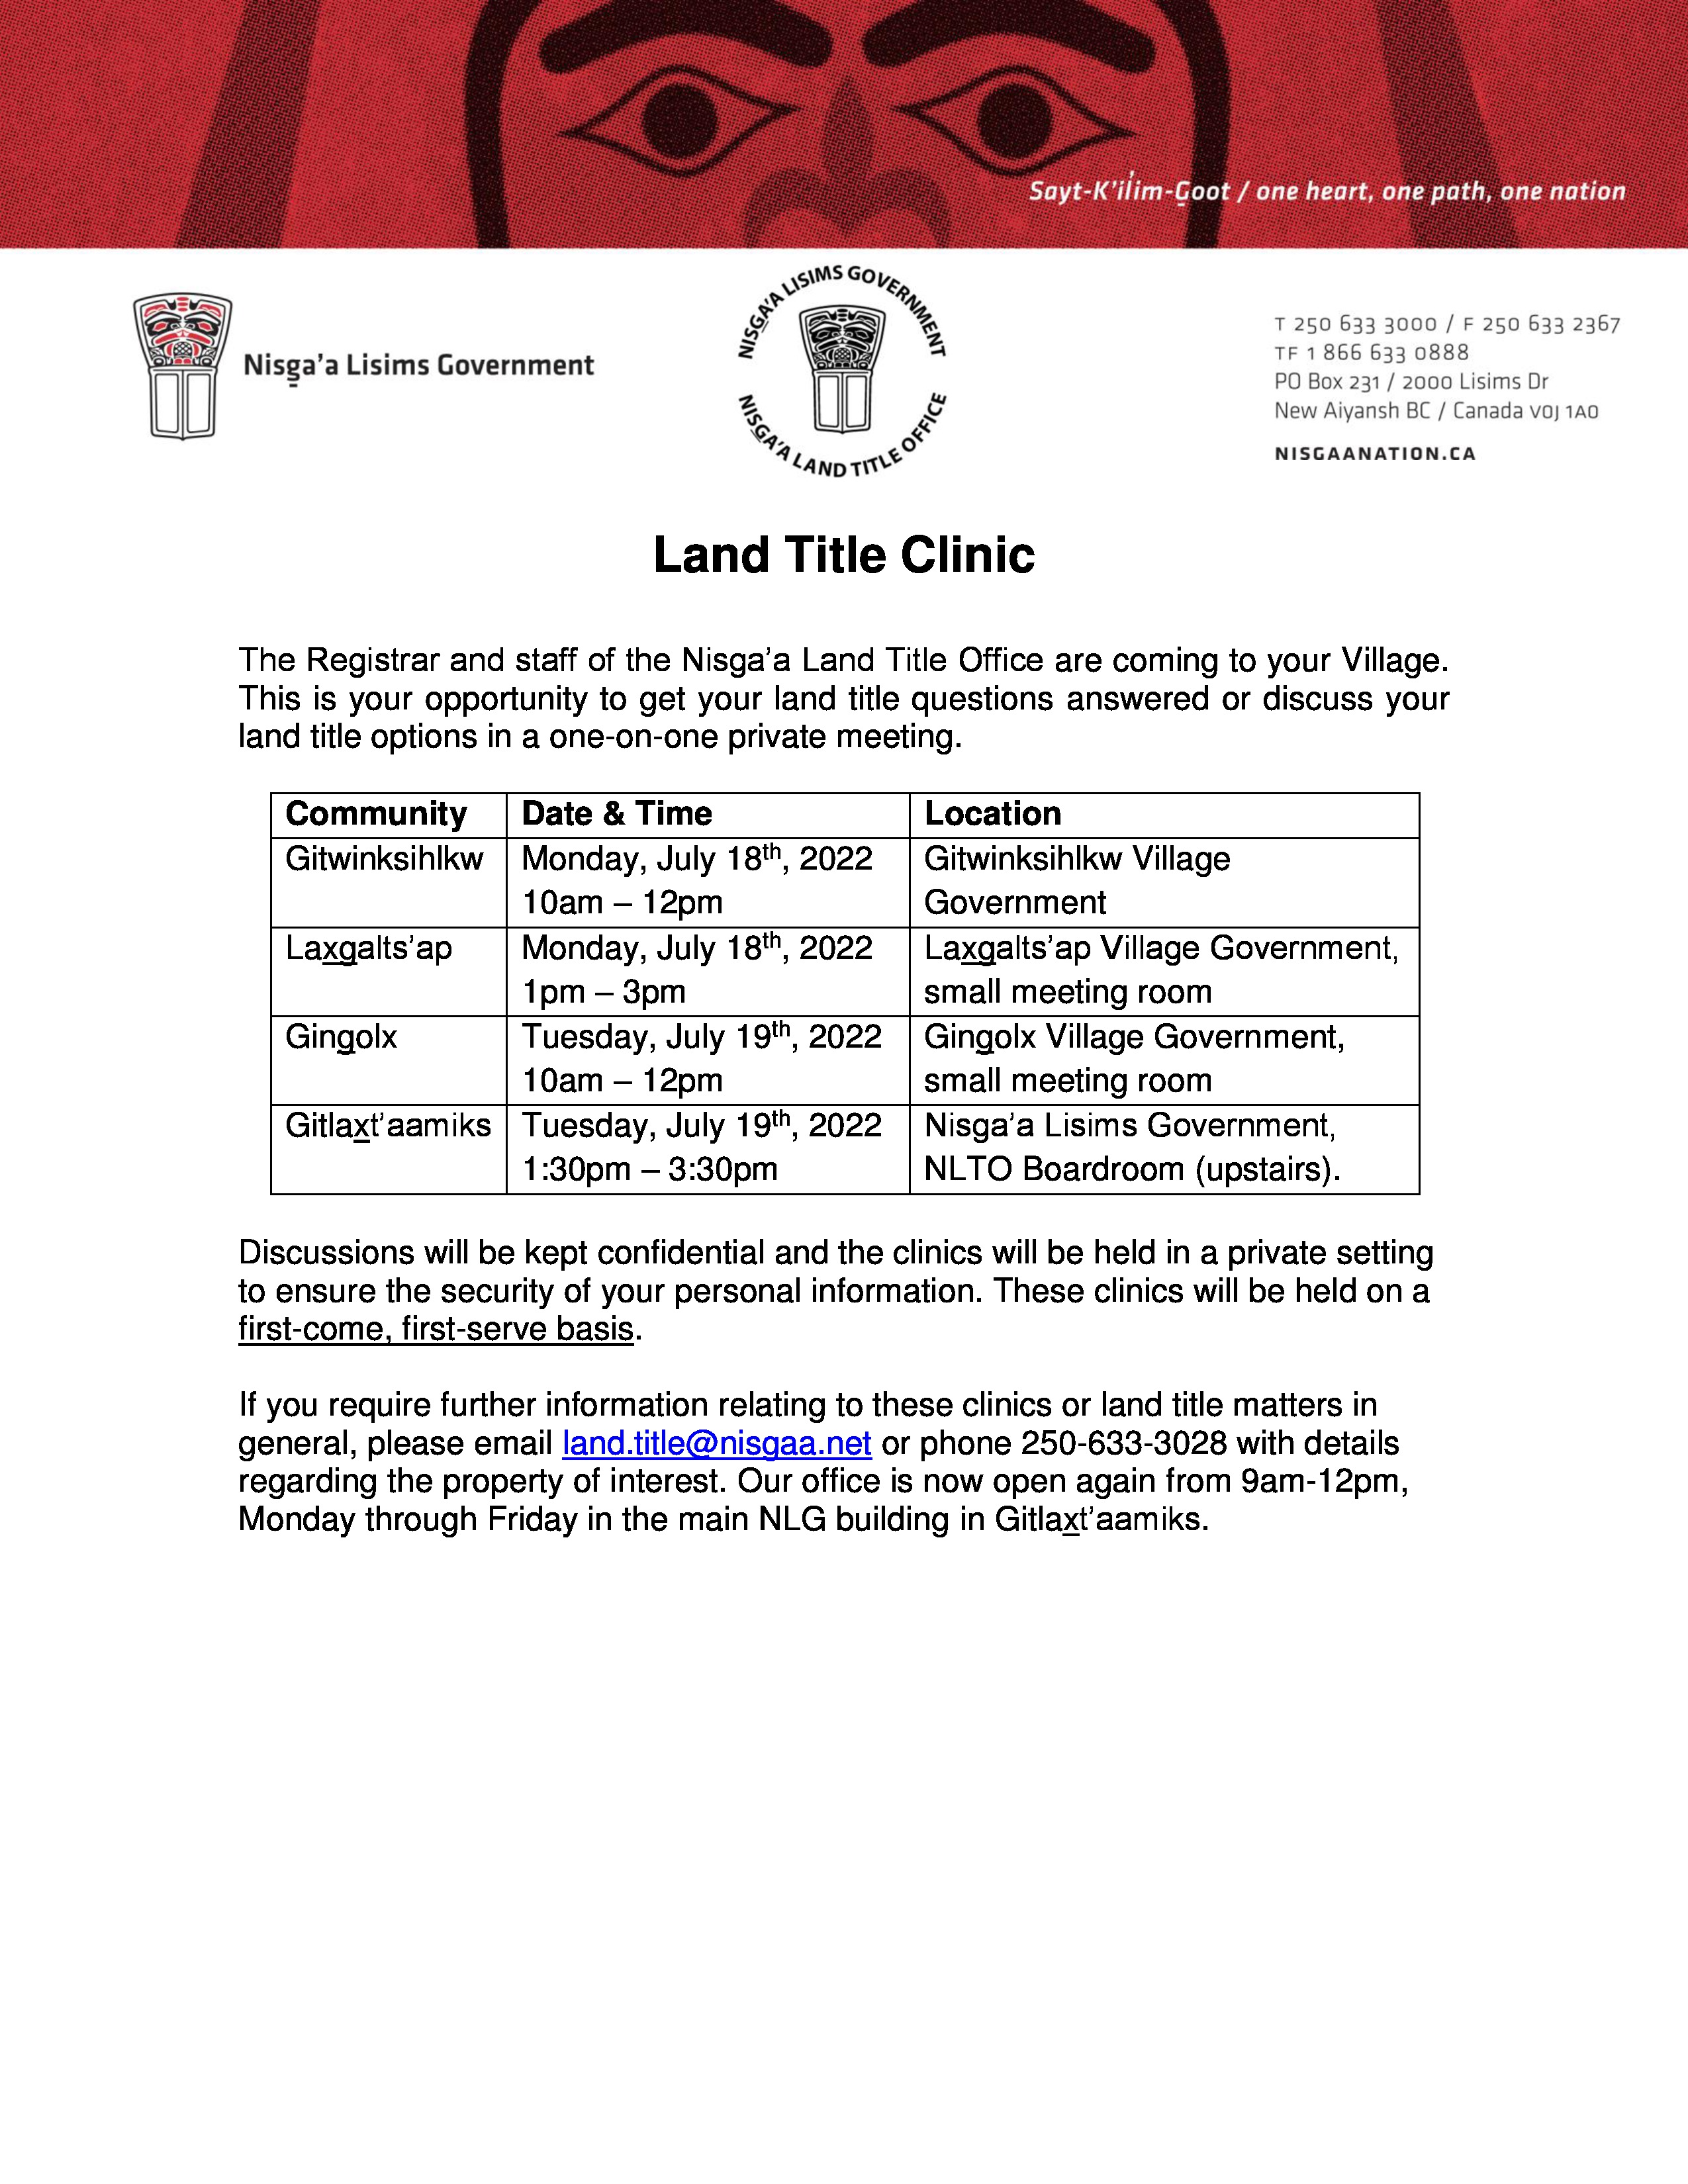 Land Title Clinic Poster - July 2022